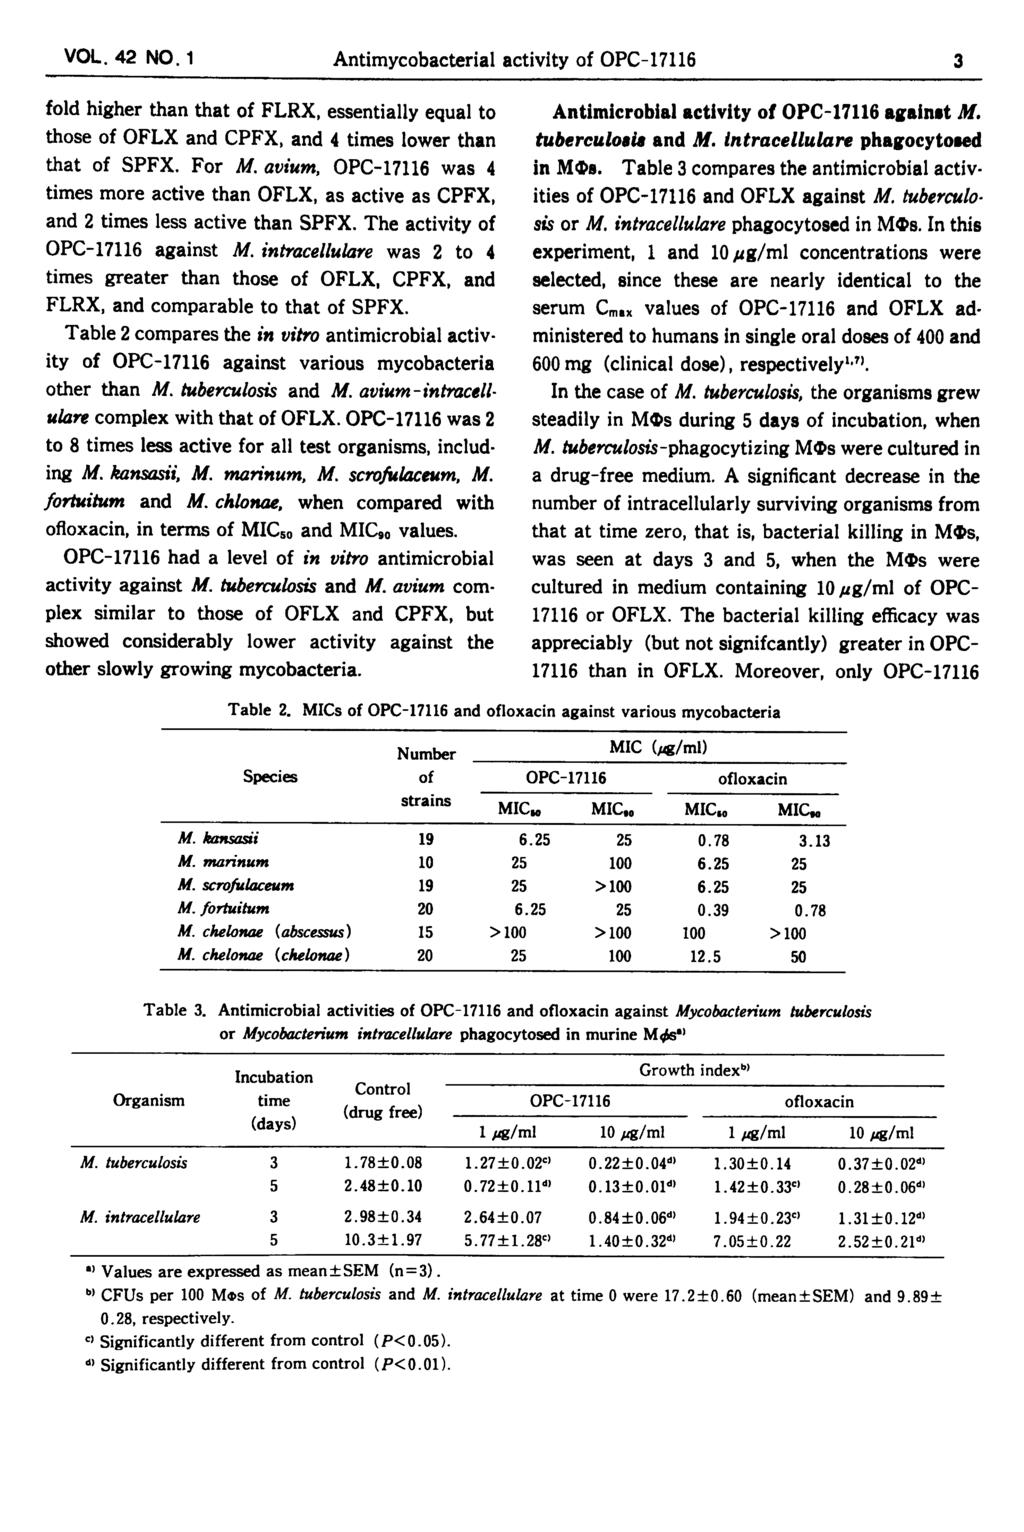 a VOL.42 NO.1 Antimycobacterial activity of OPC-17116 fold higher than that of FLRX, essentially equal to those of OFLX and CPFX, and 4 times lower than that of SPFX. For M.